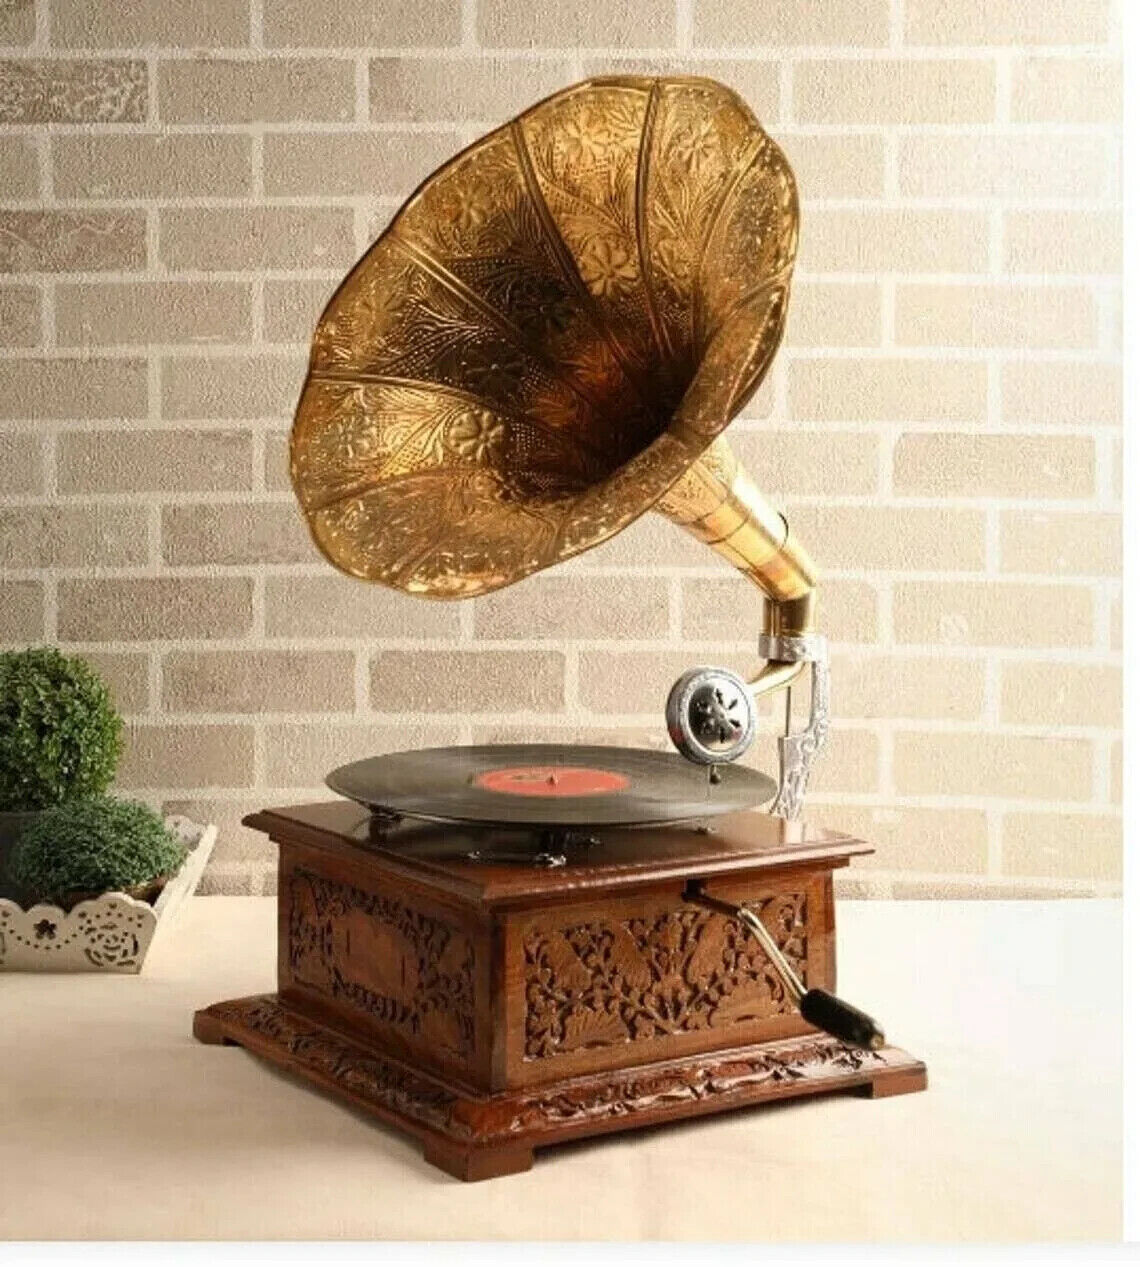 Antique Look Gramophone Fully Functional Working Phonograph win-up record player